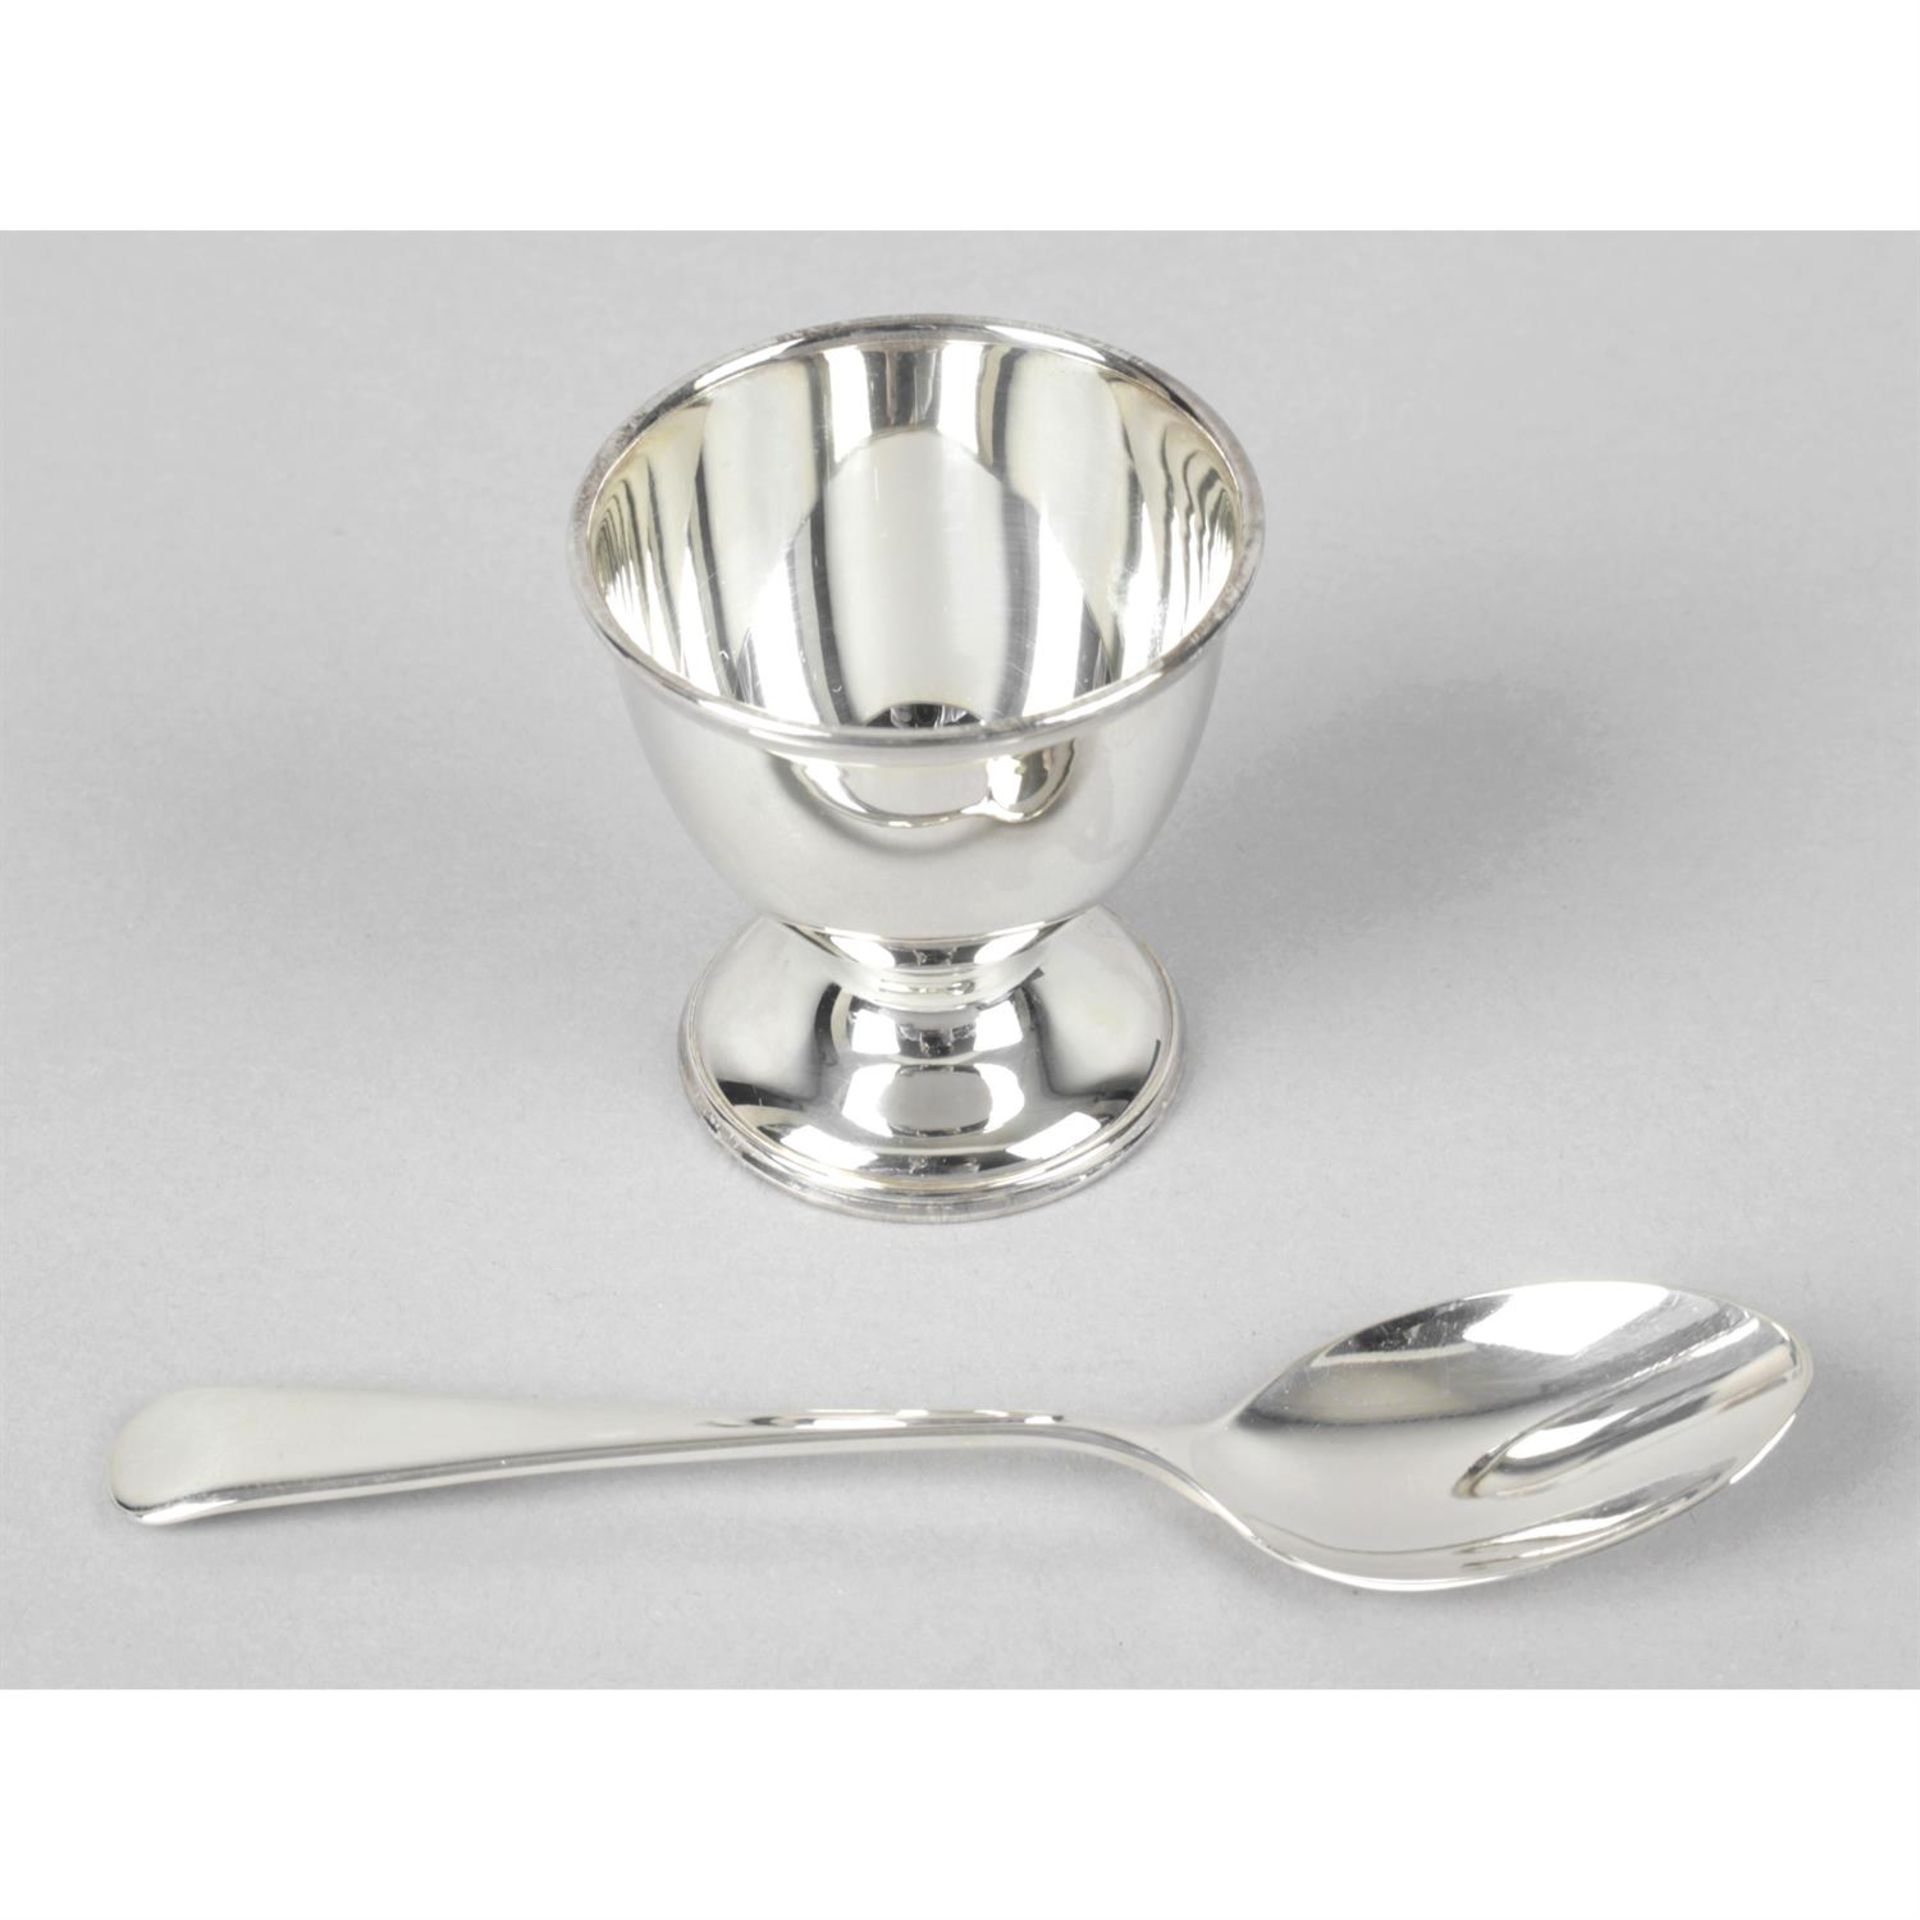 A modern silver egg cup and spoon, in fitted case.